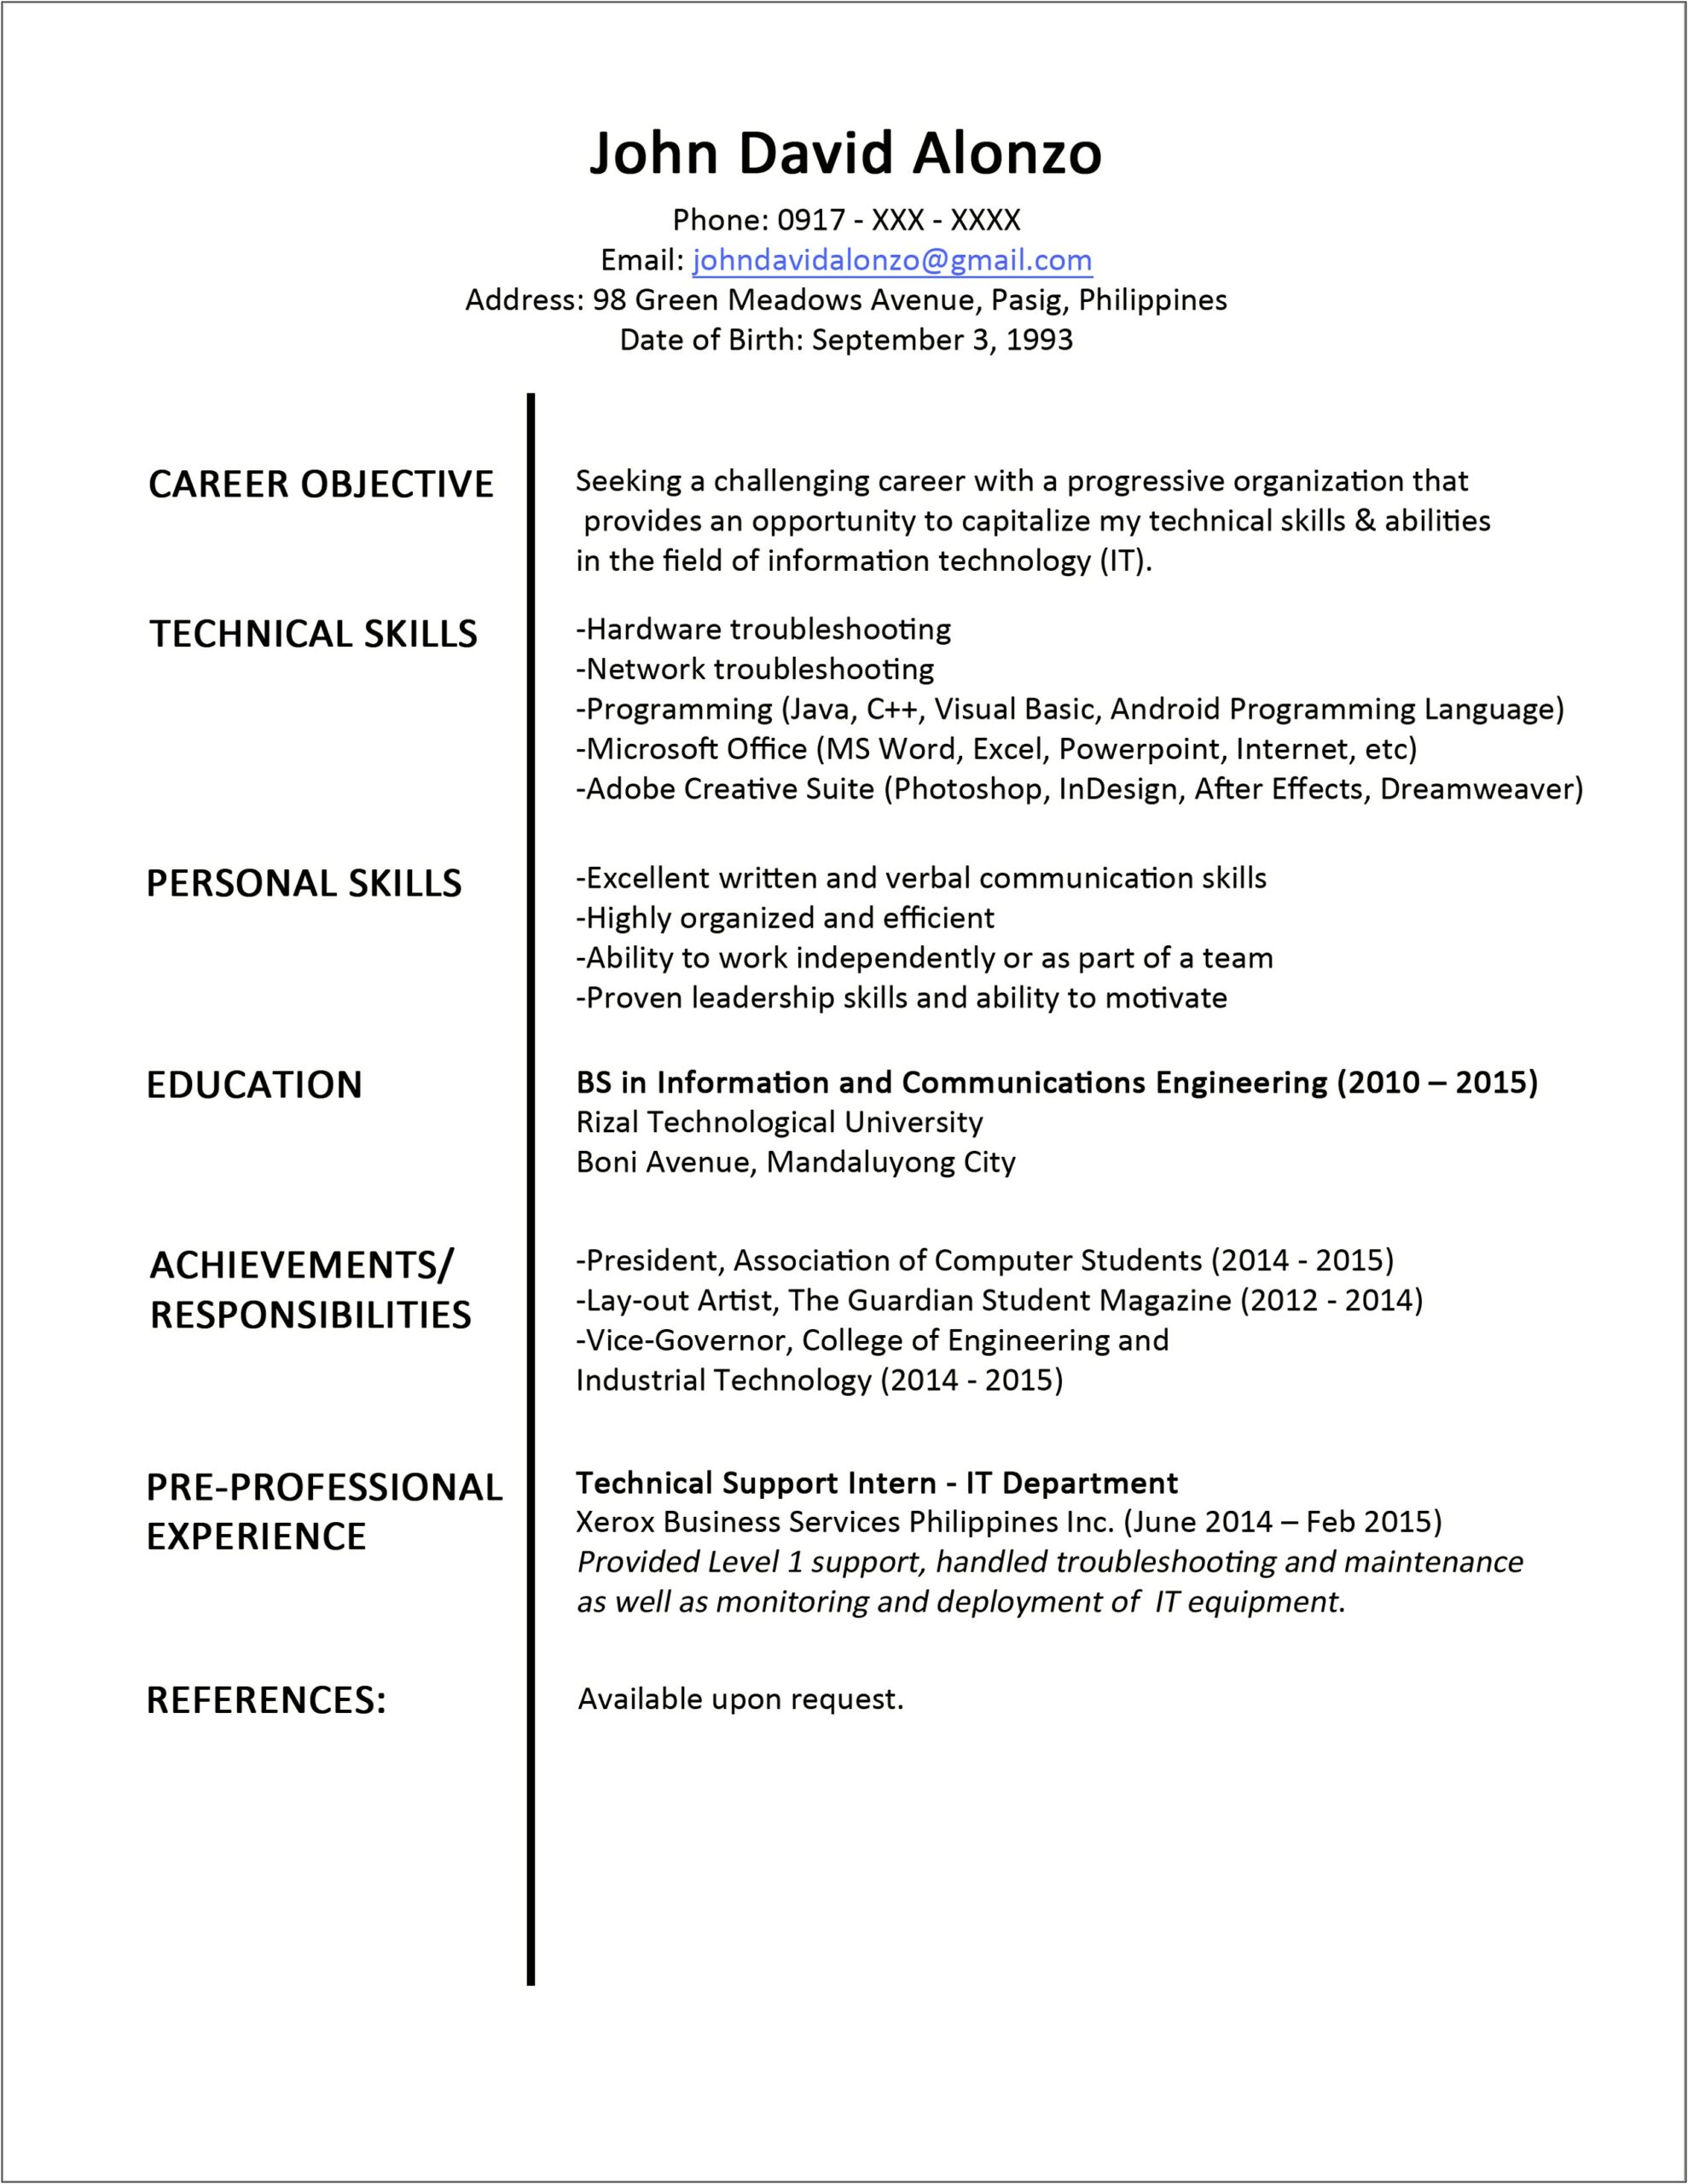 Resume Writing For Technical Jobs